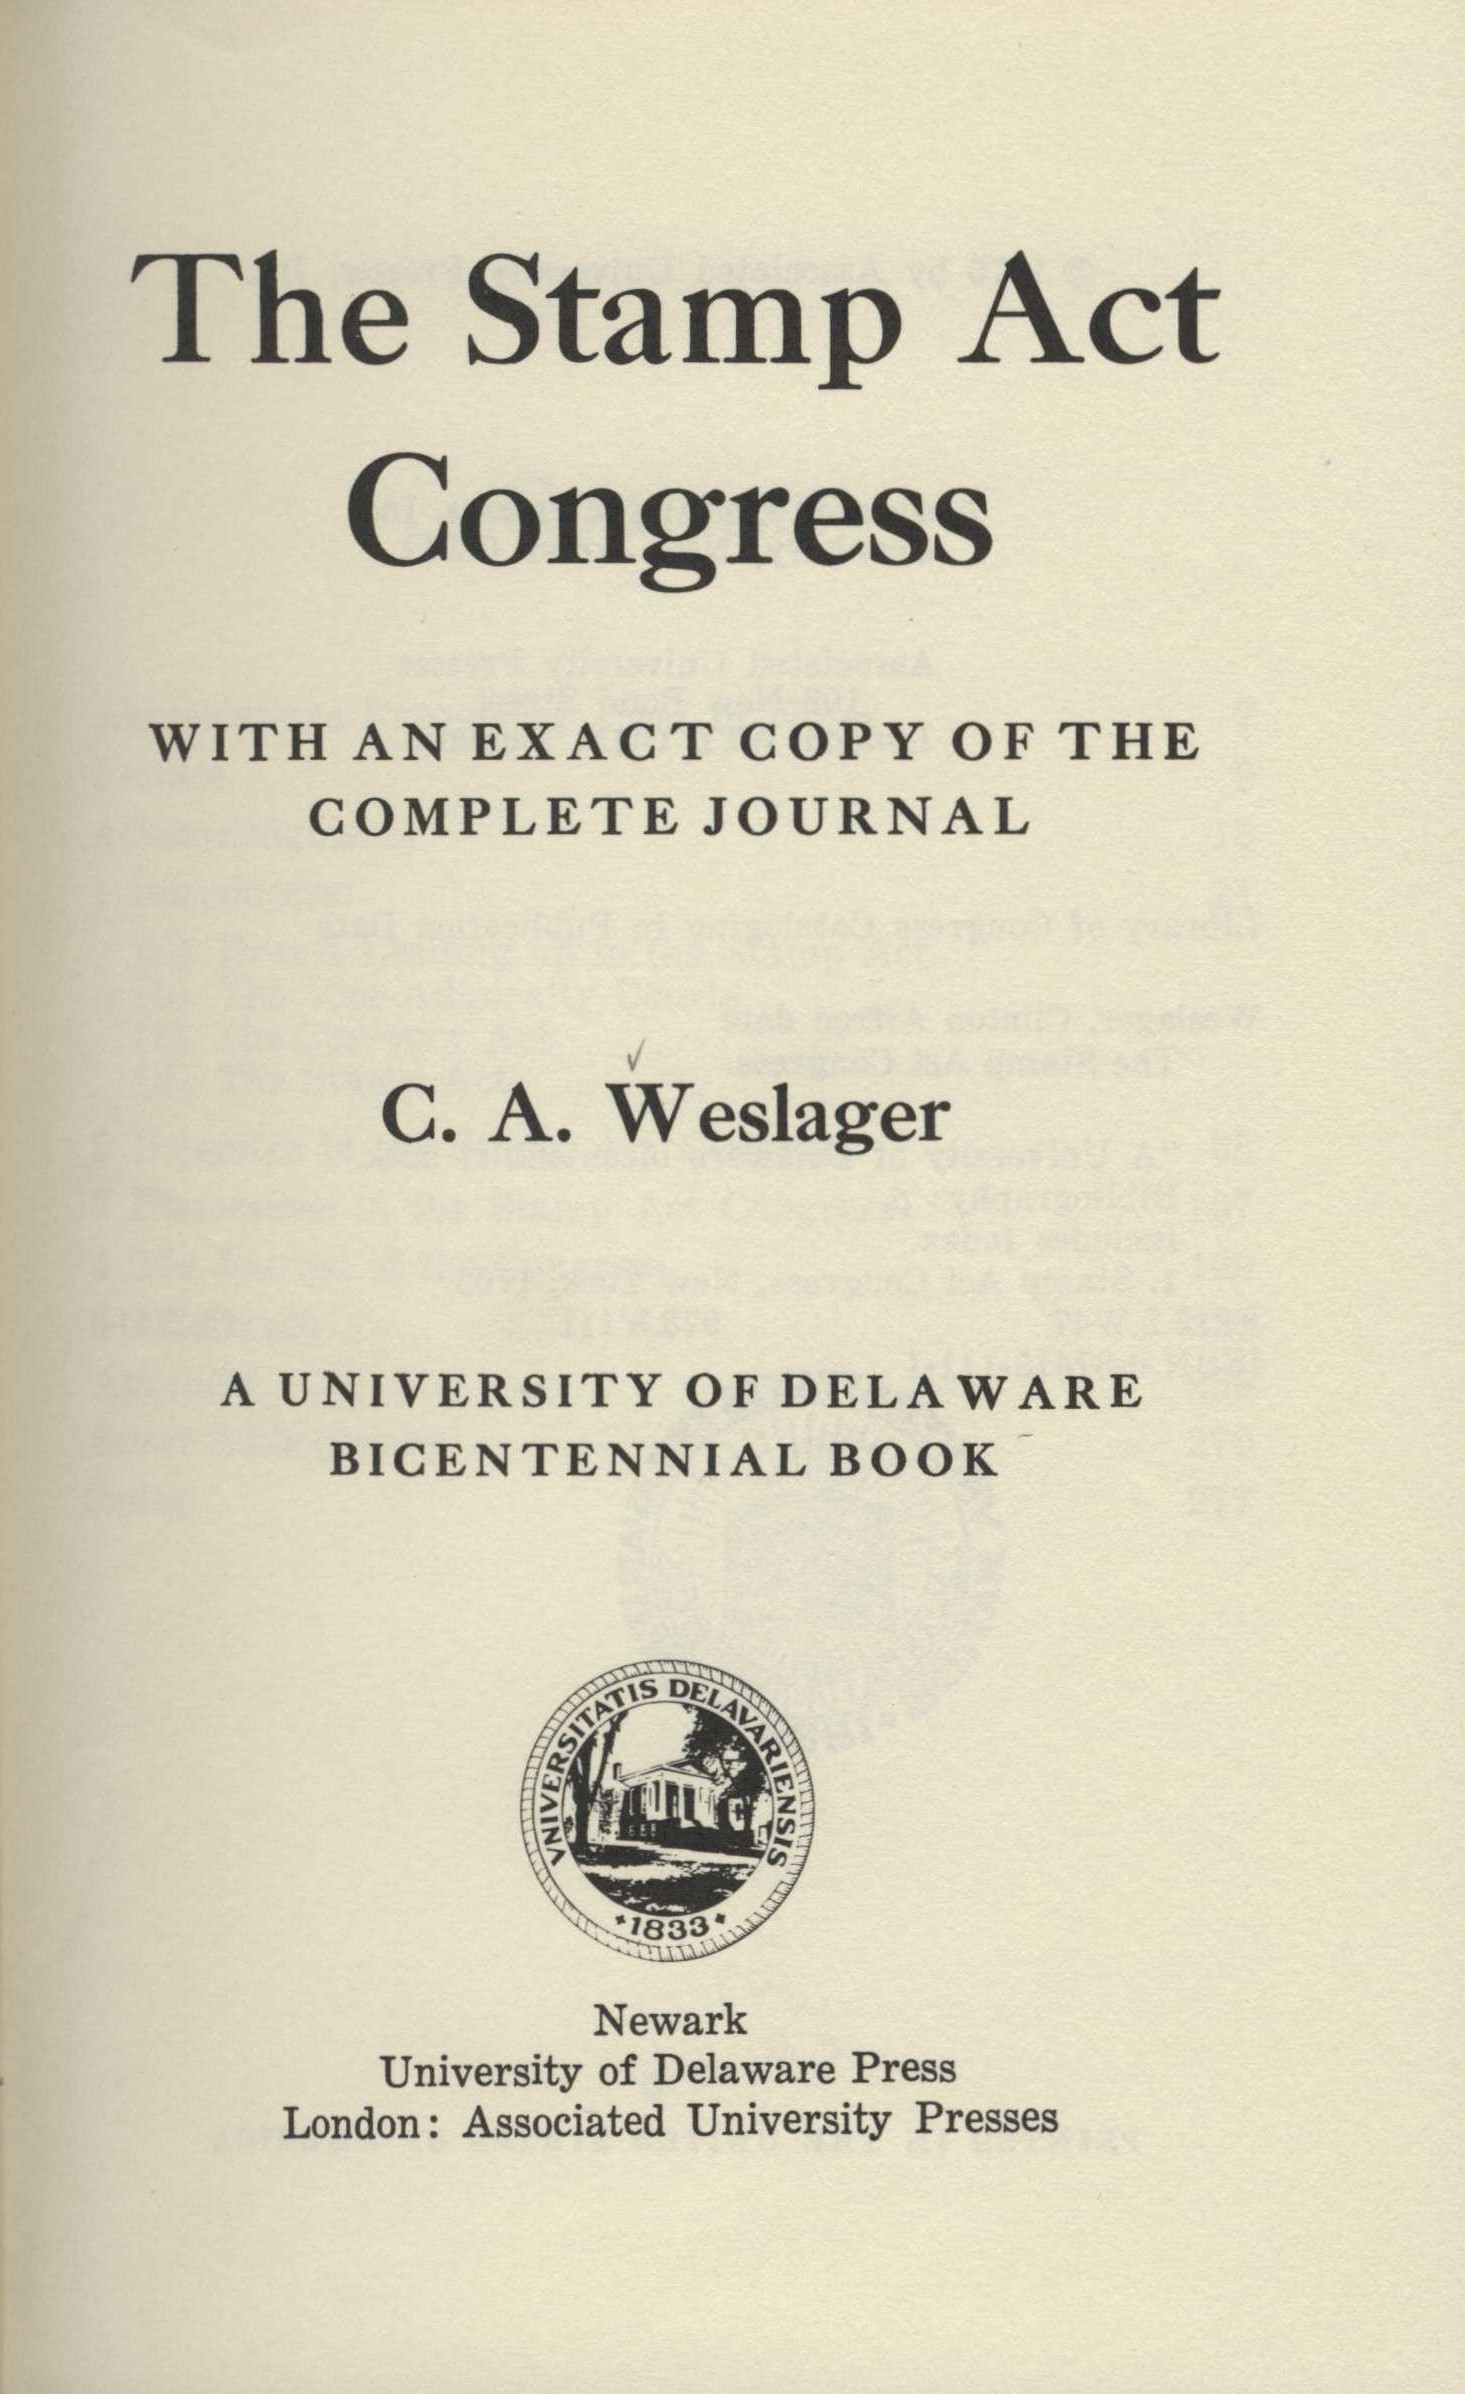 The Stamp Act Congress by C. A. Weslager